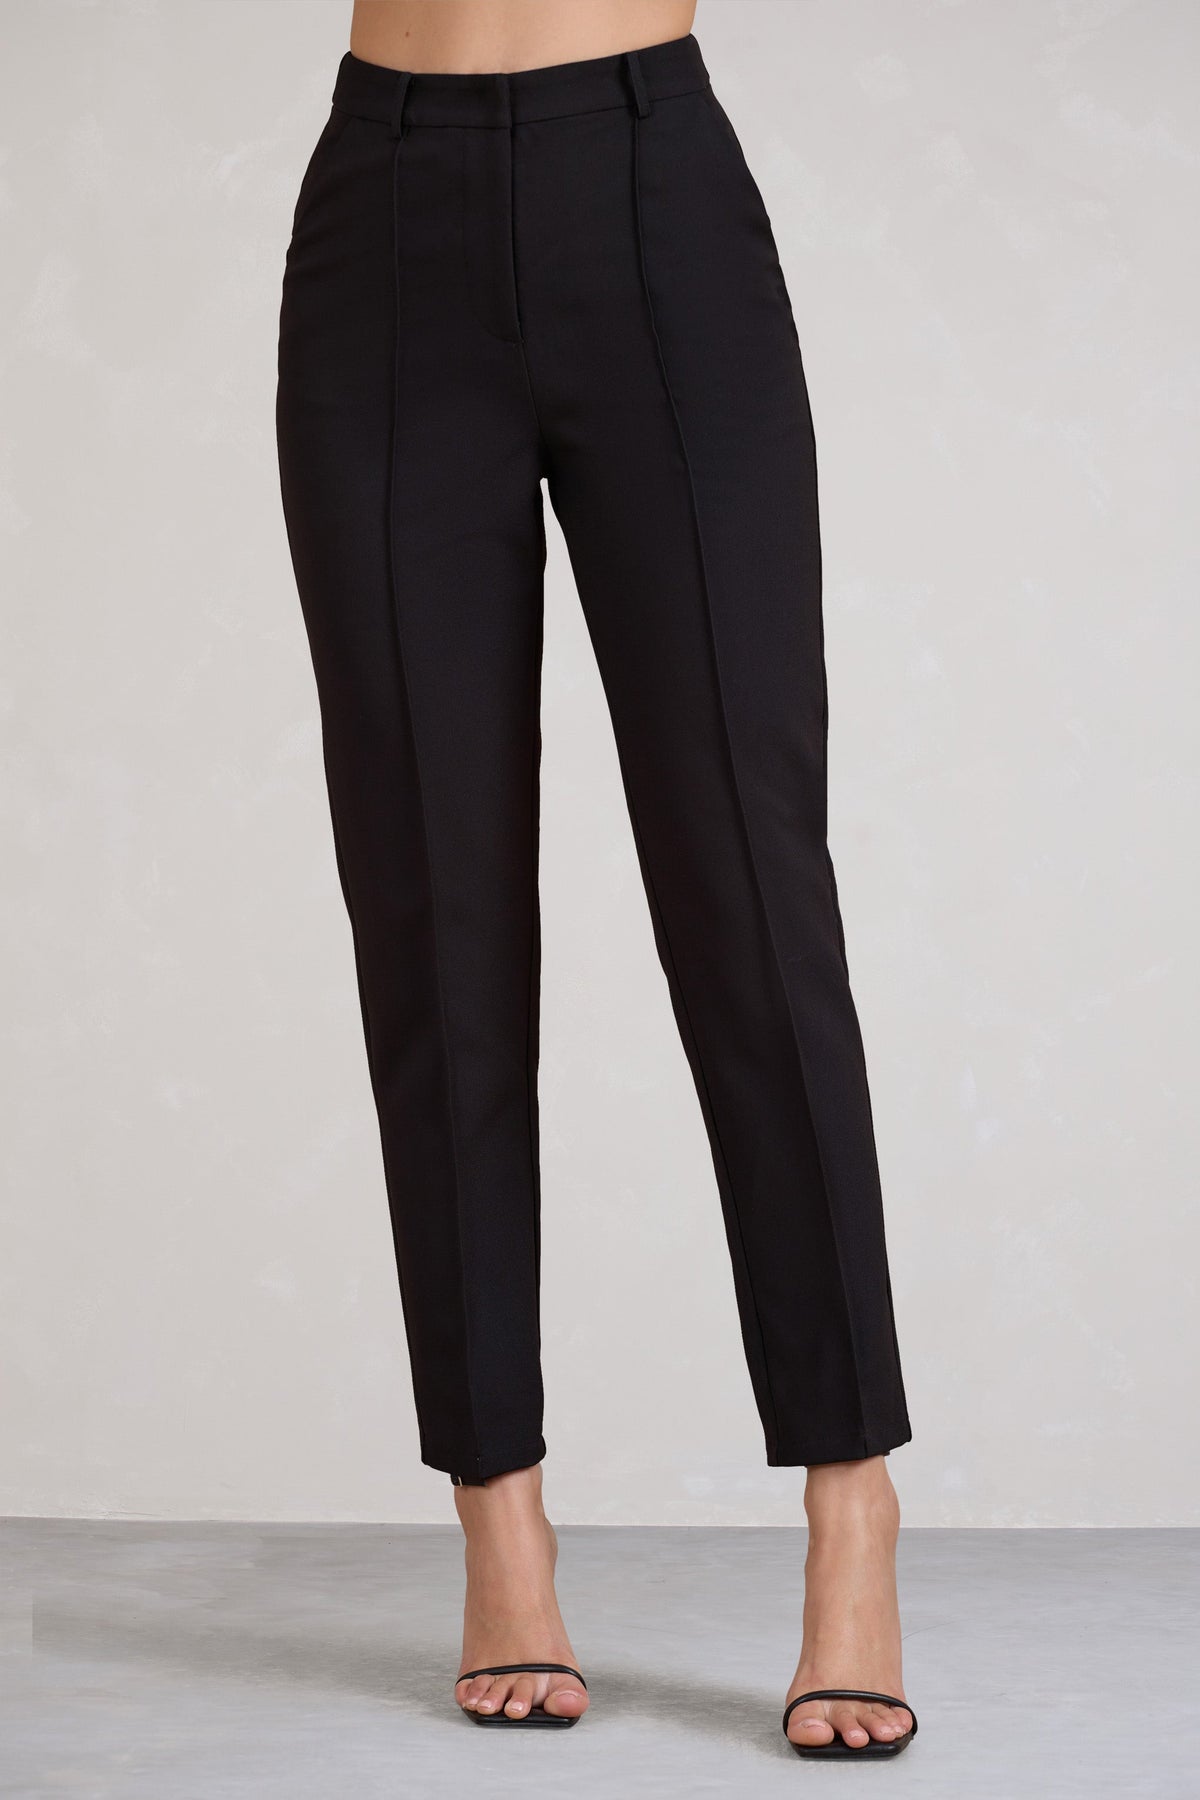 Buy Long Black Pants, Straight Leg Pants, Cigarette Trousers, High Waist  Solid Black Stretchy Comfortable Pants Online in India - Etsy